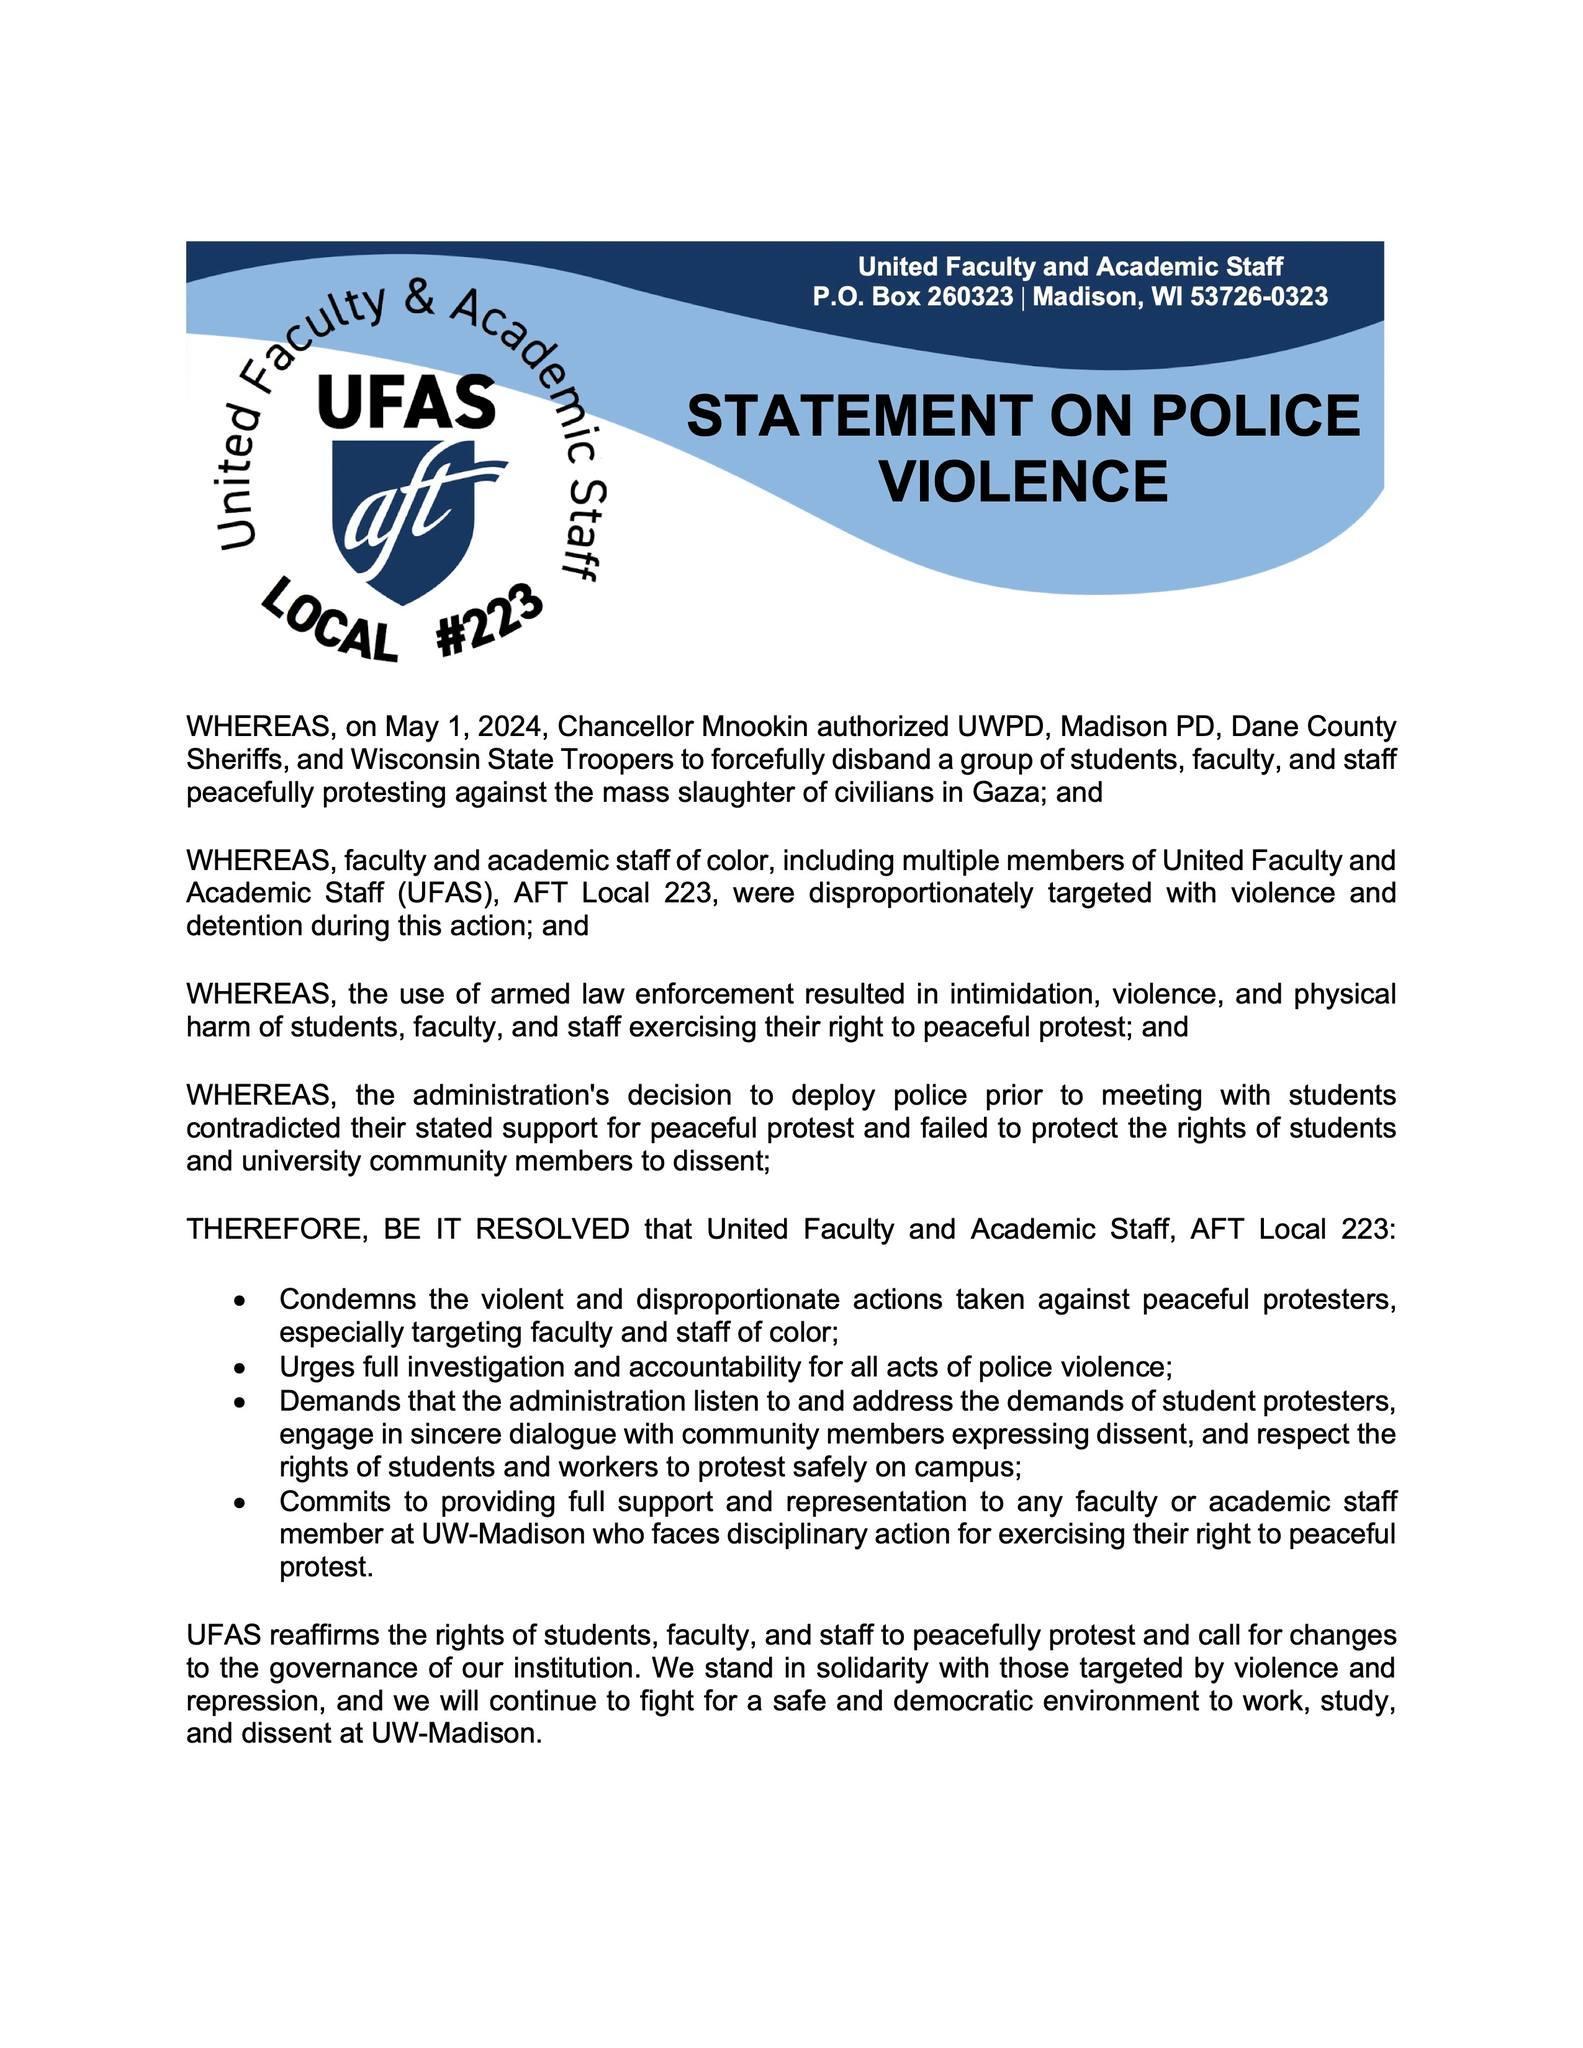 United Faculty and Academic Staff (UFAS) Statement on Police Violence